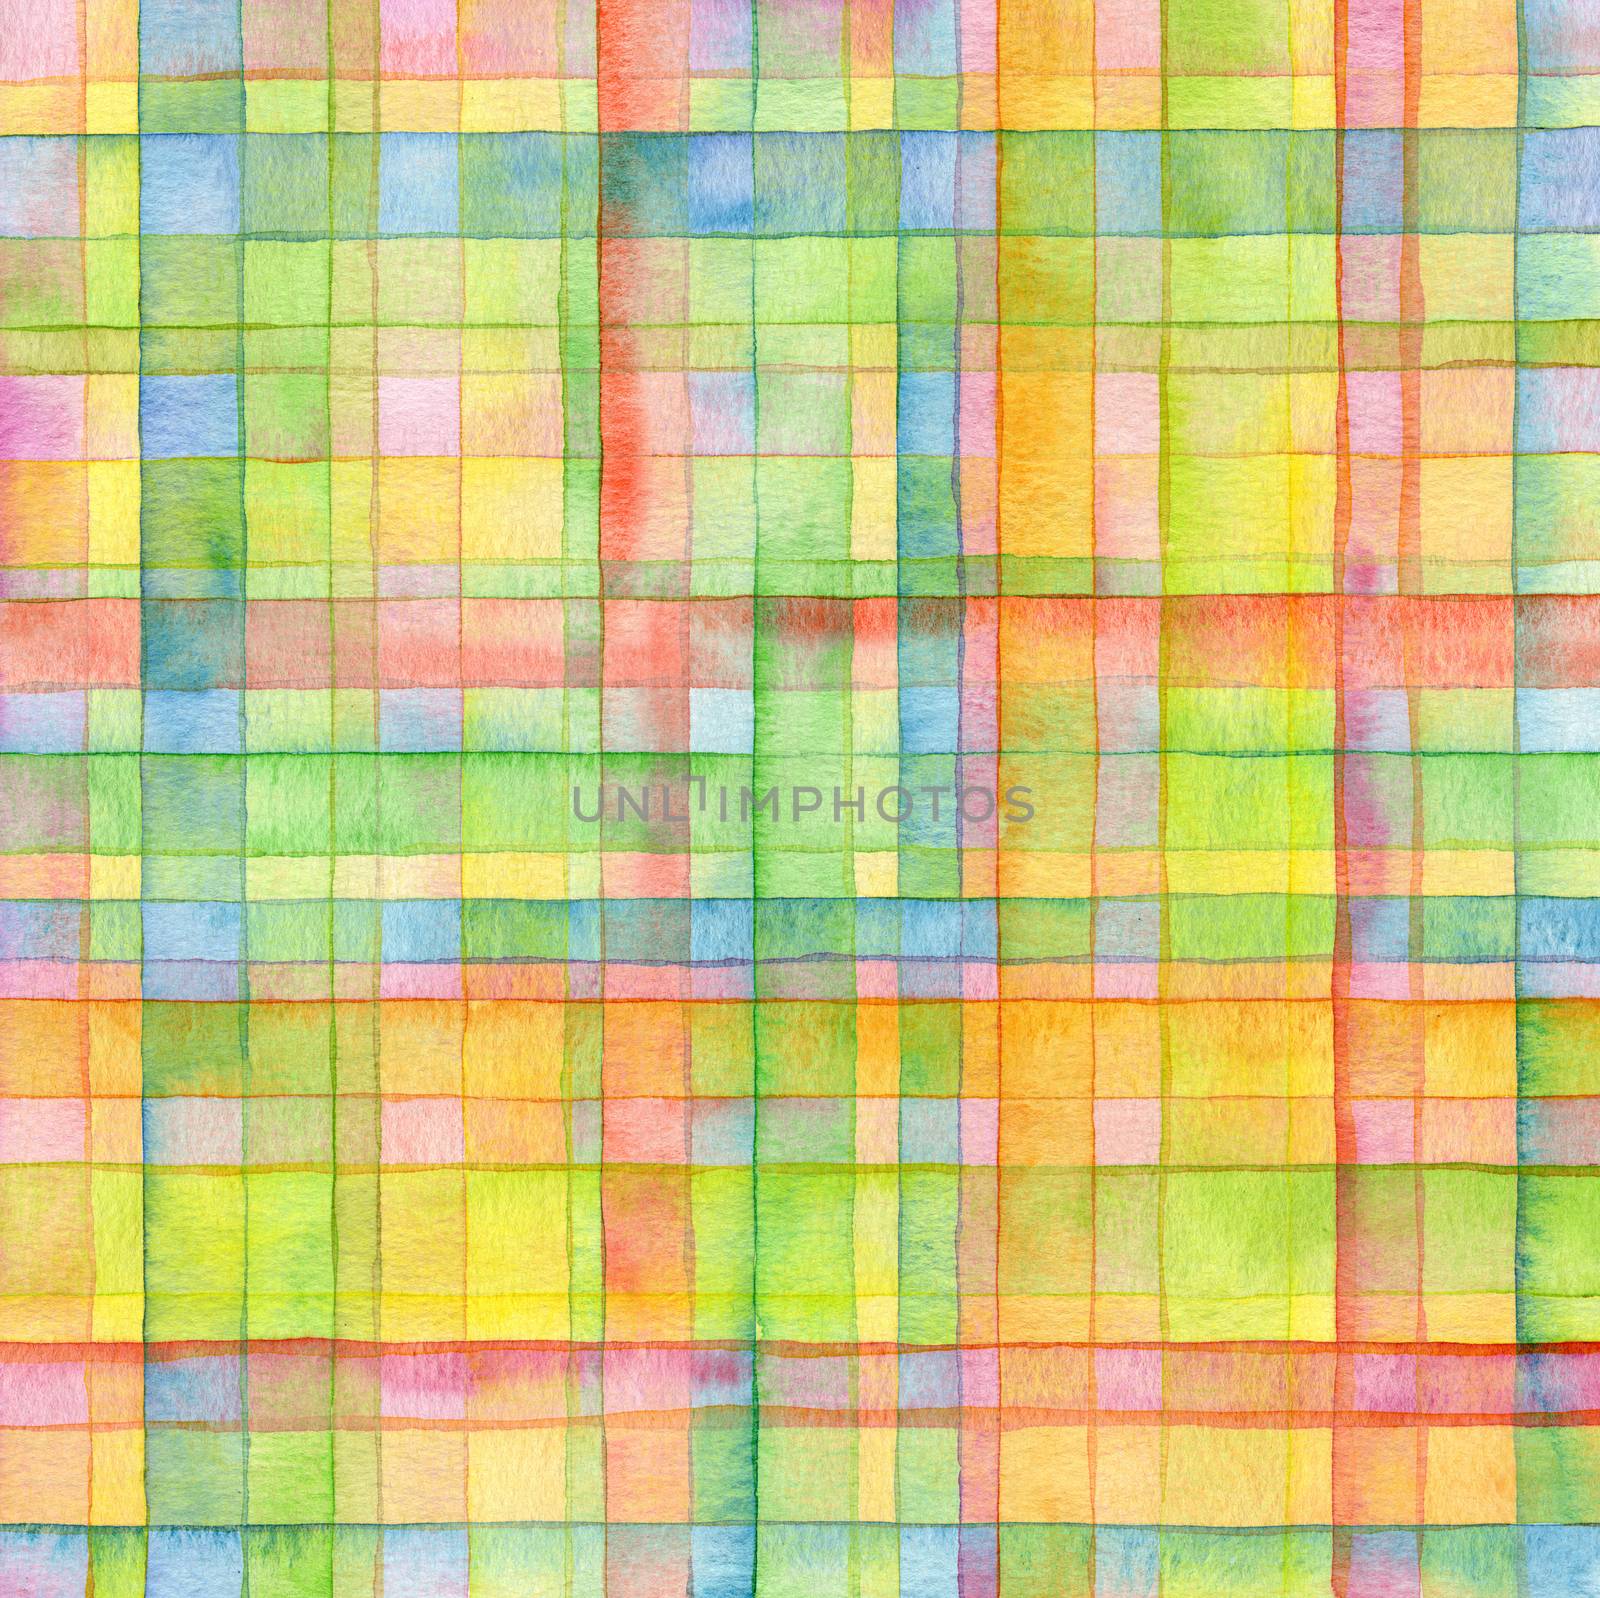 Abstract  strip watercolor painted background by rudchenko